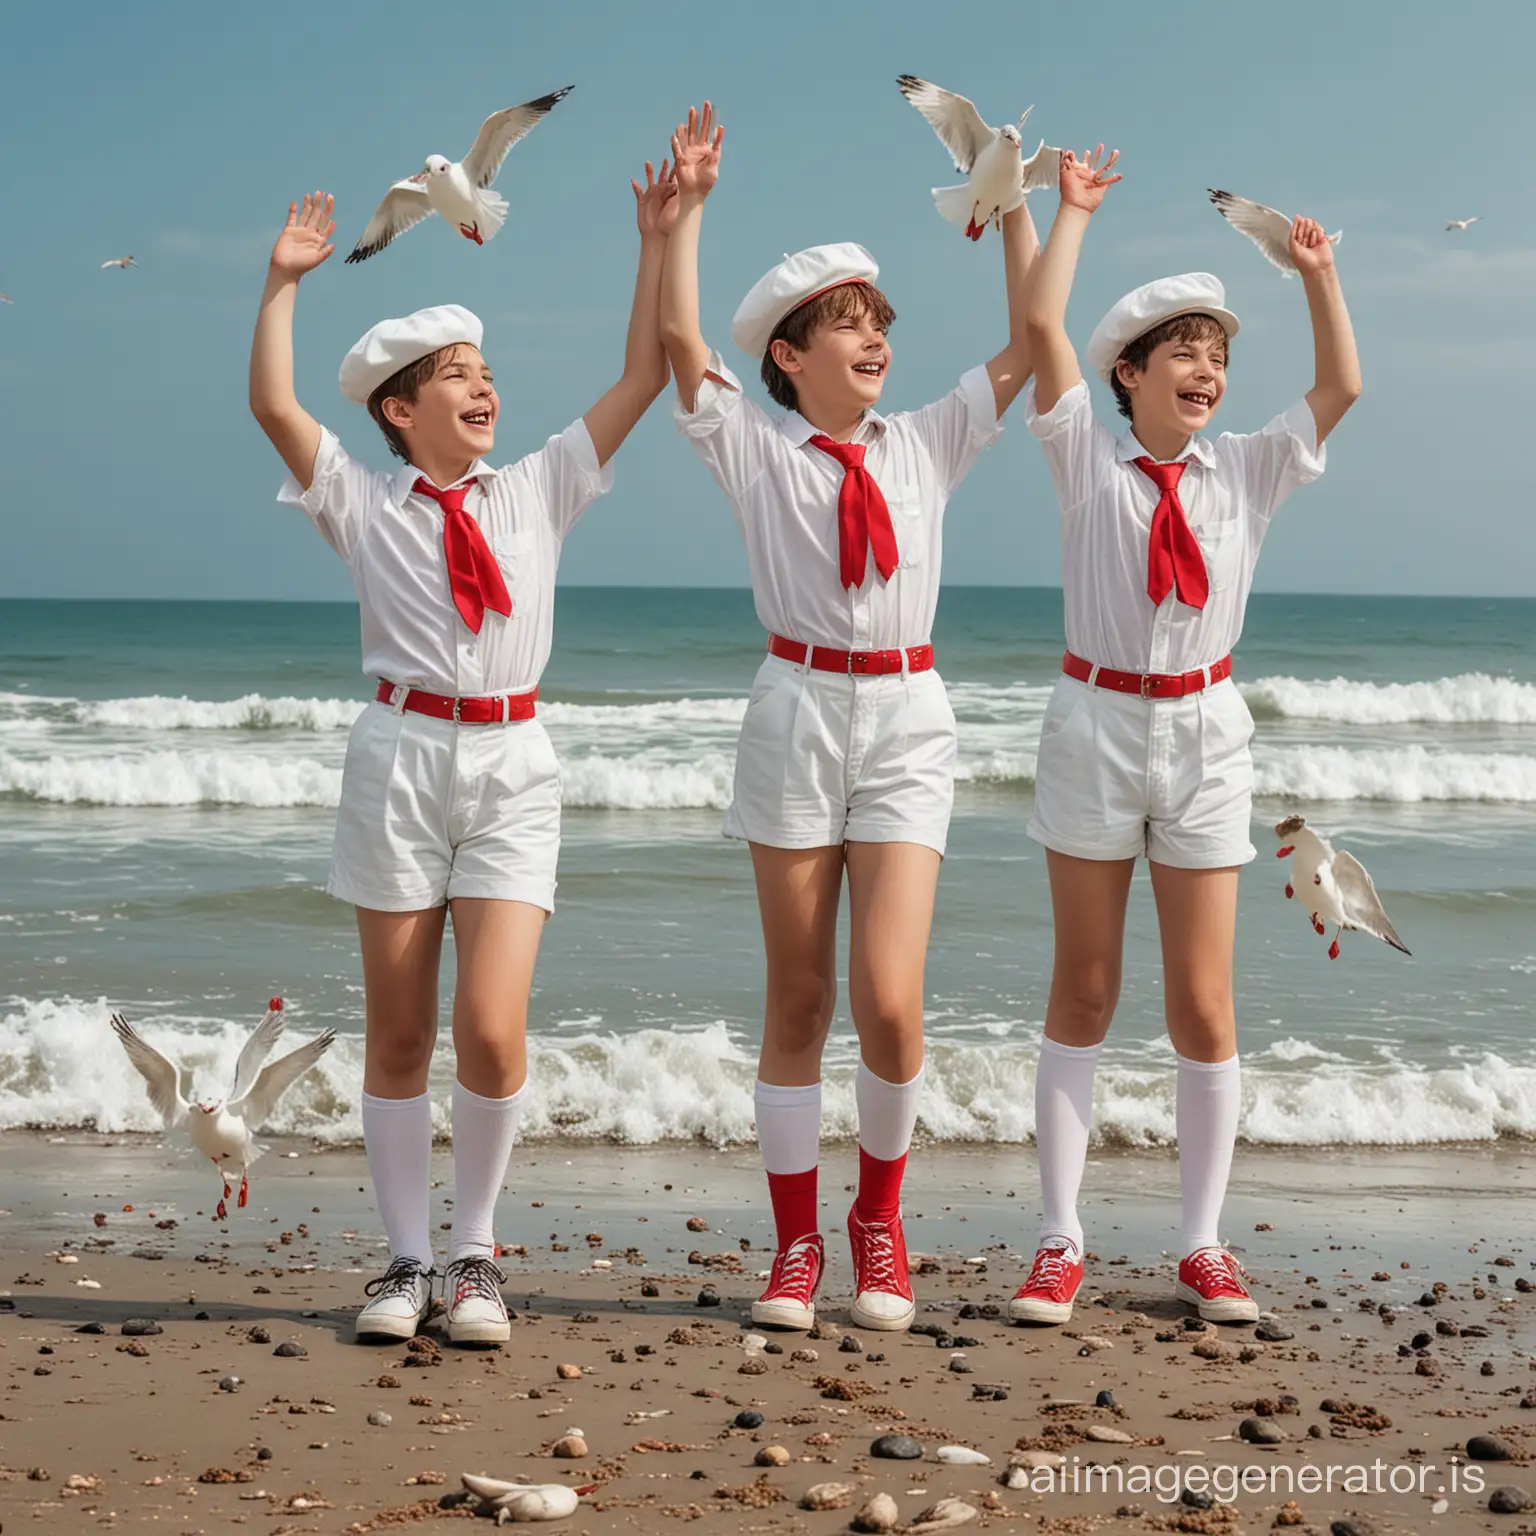 Four 16-year-old boys in a white beret, a short white shirt with a red tie, white very short shorts with a red belt, red knee-high socks, white sneakers. They are standing on the seashore and cheerfully waving their hands. The sky is blue without clouds, seagulls are flying.